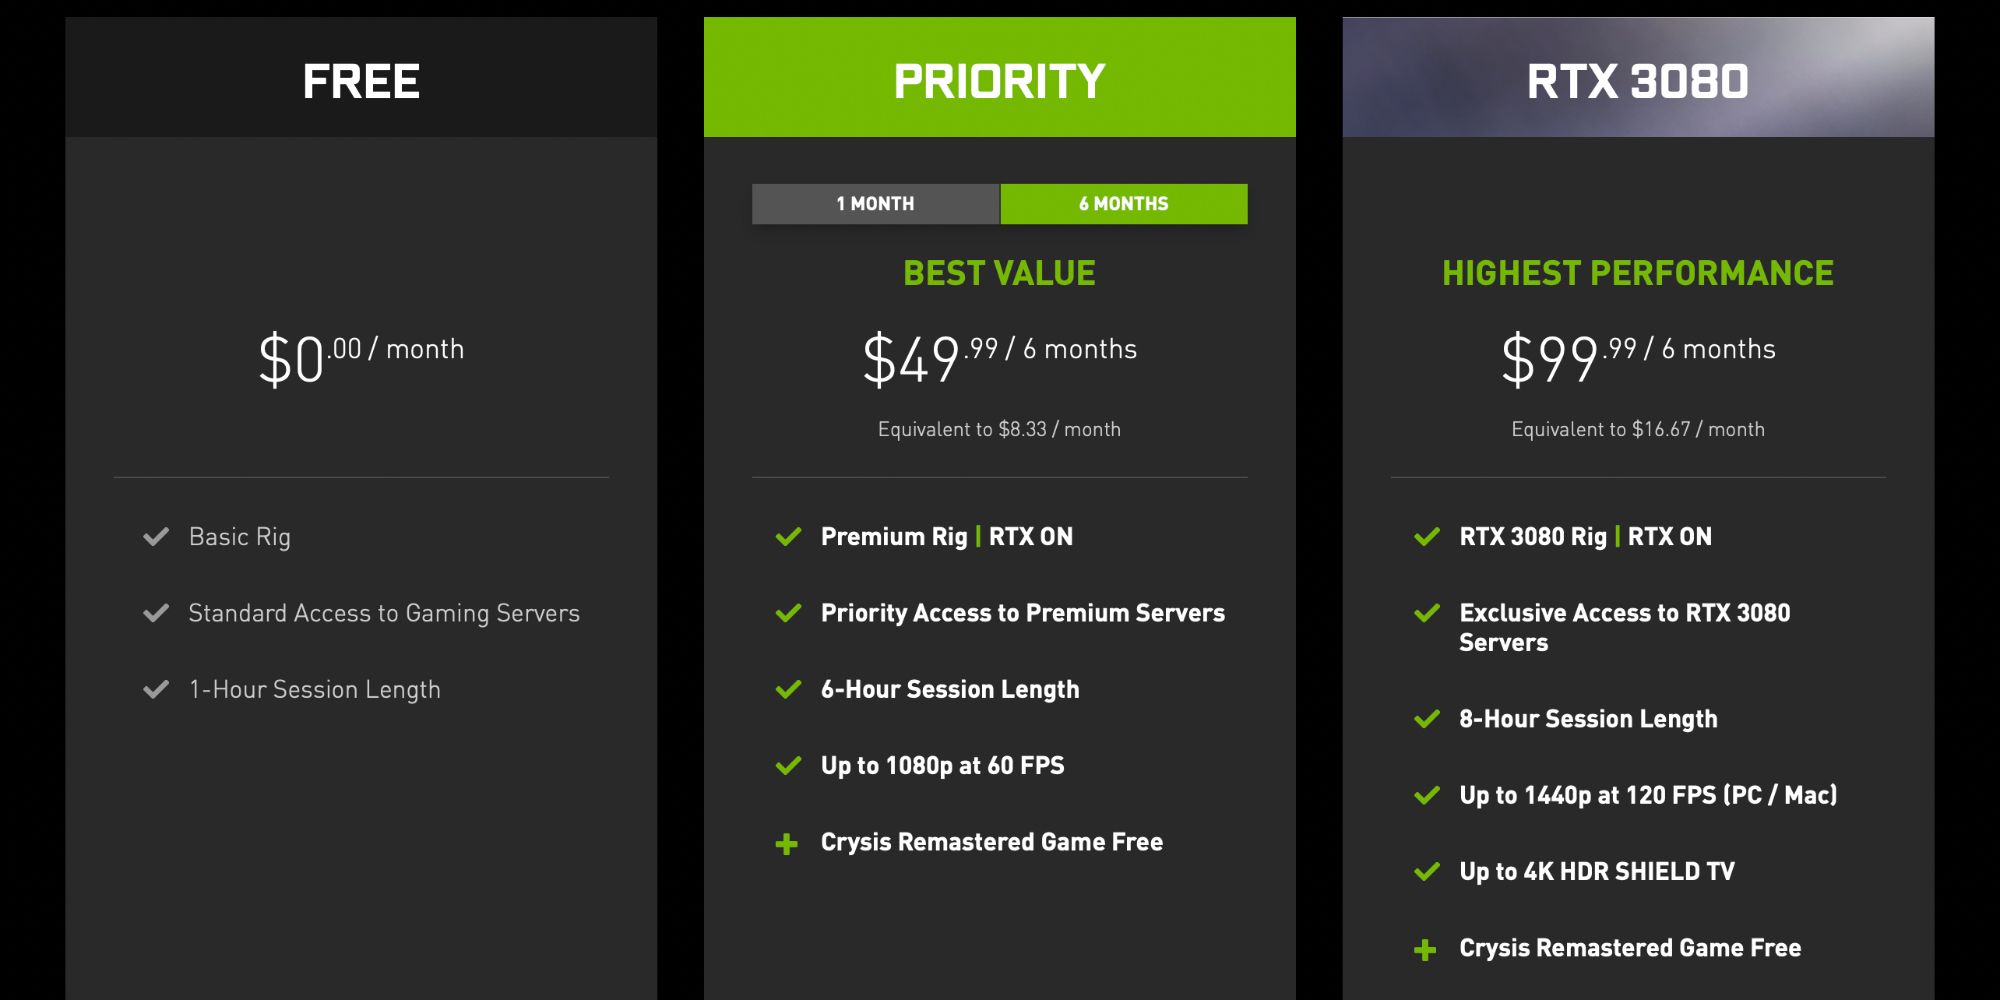 Nvidia GeForce Now plans as of January 2022